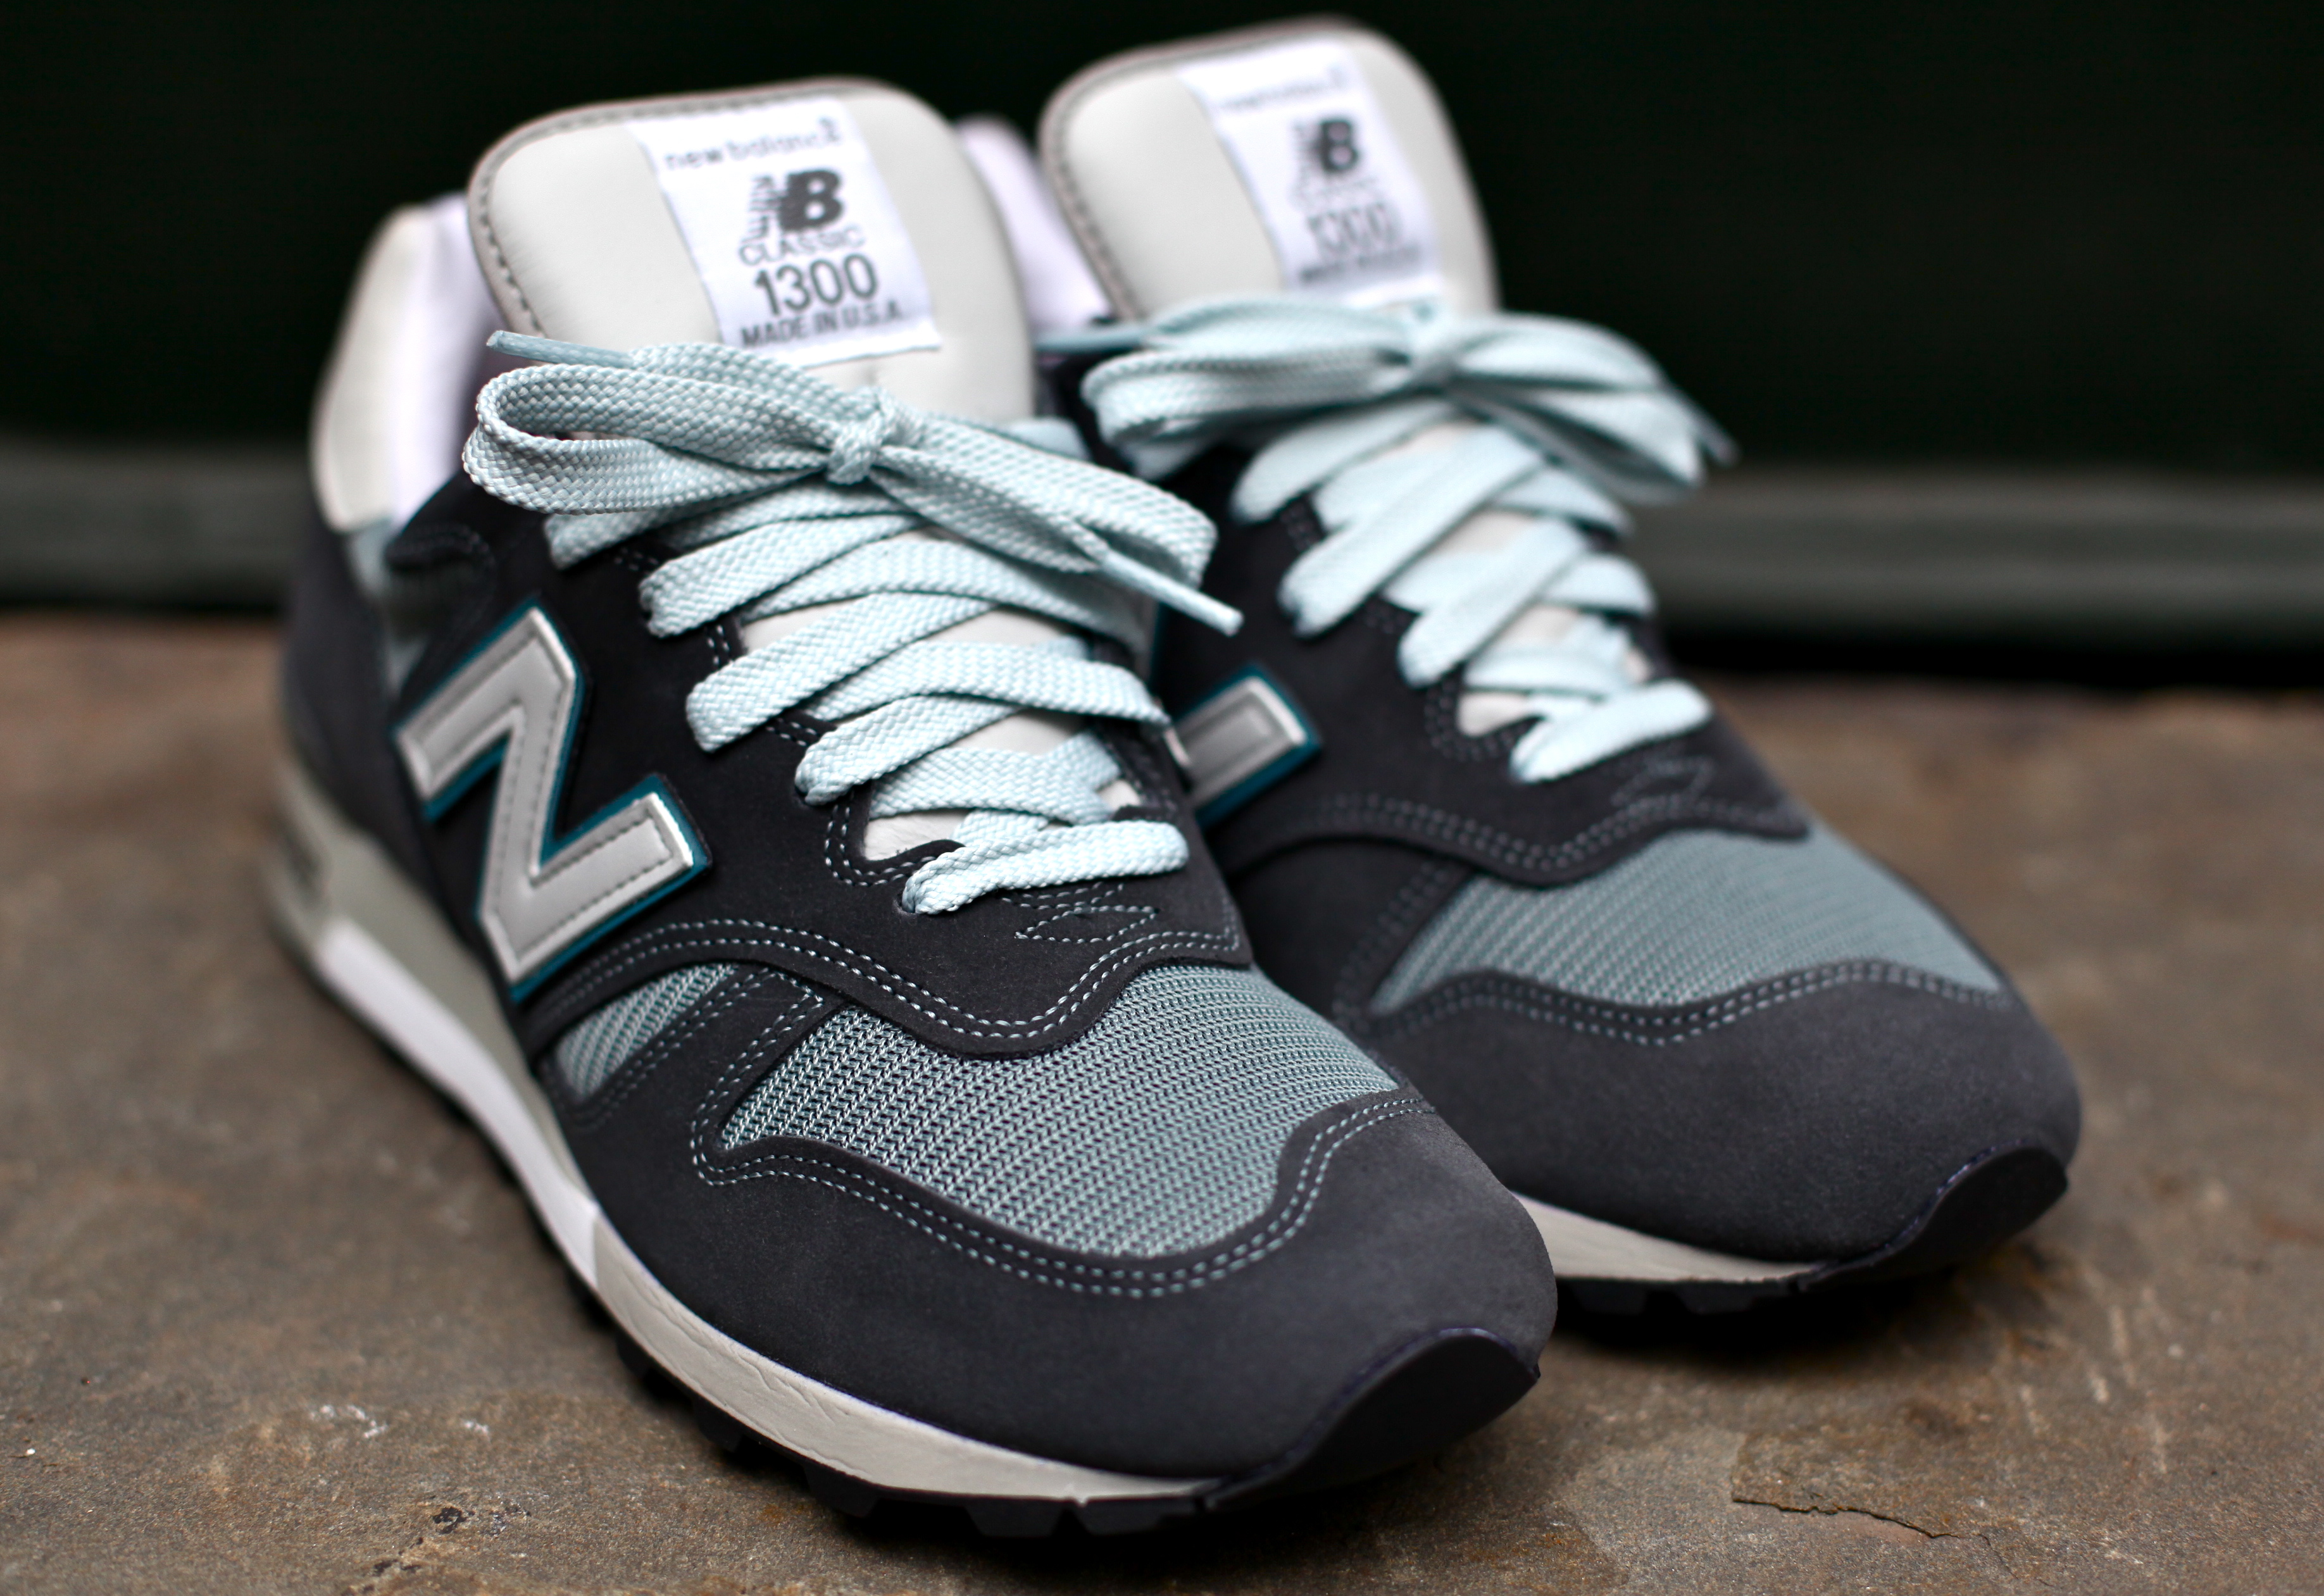 Available: New Balance 1300CL – 2010 | Vagrant Sneaker